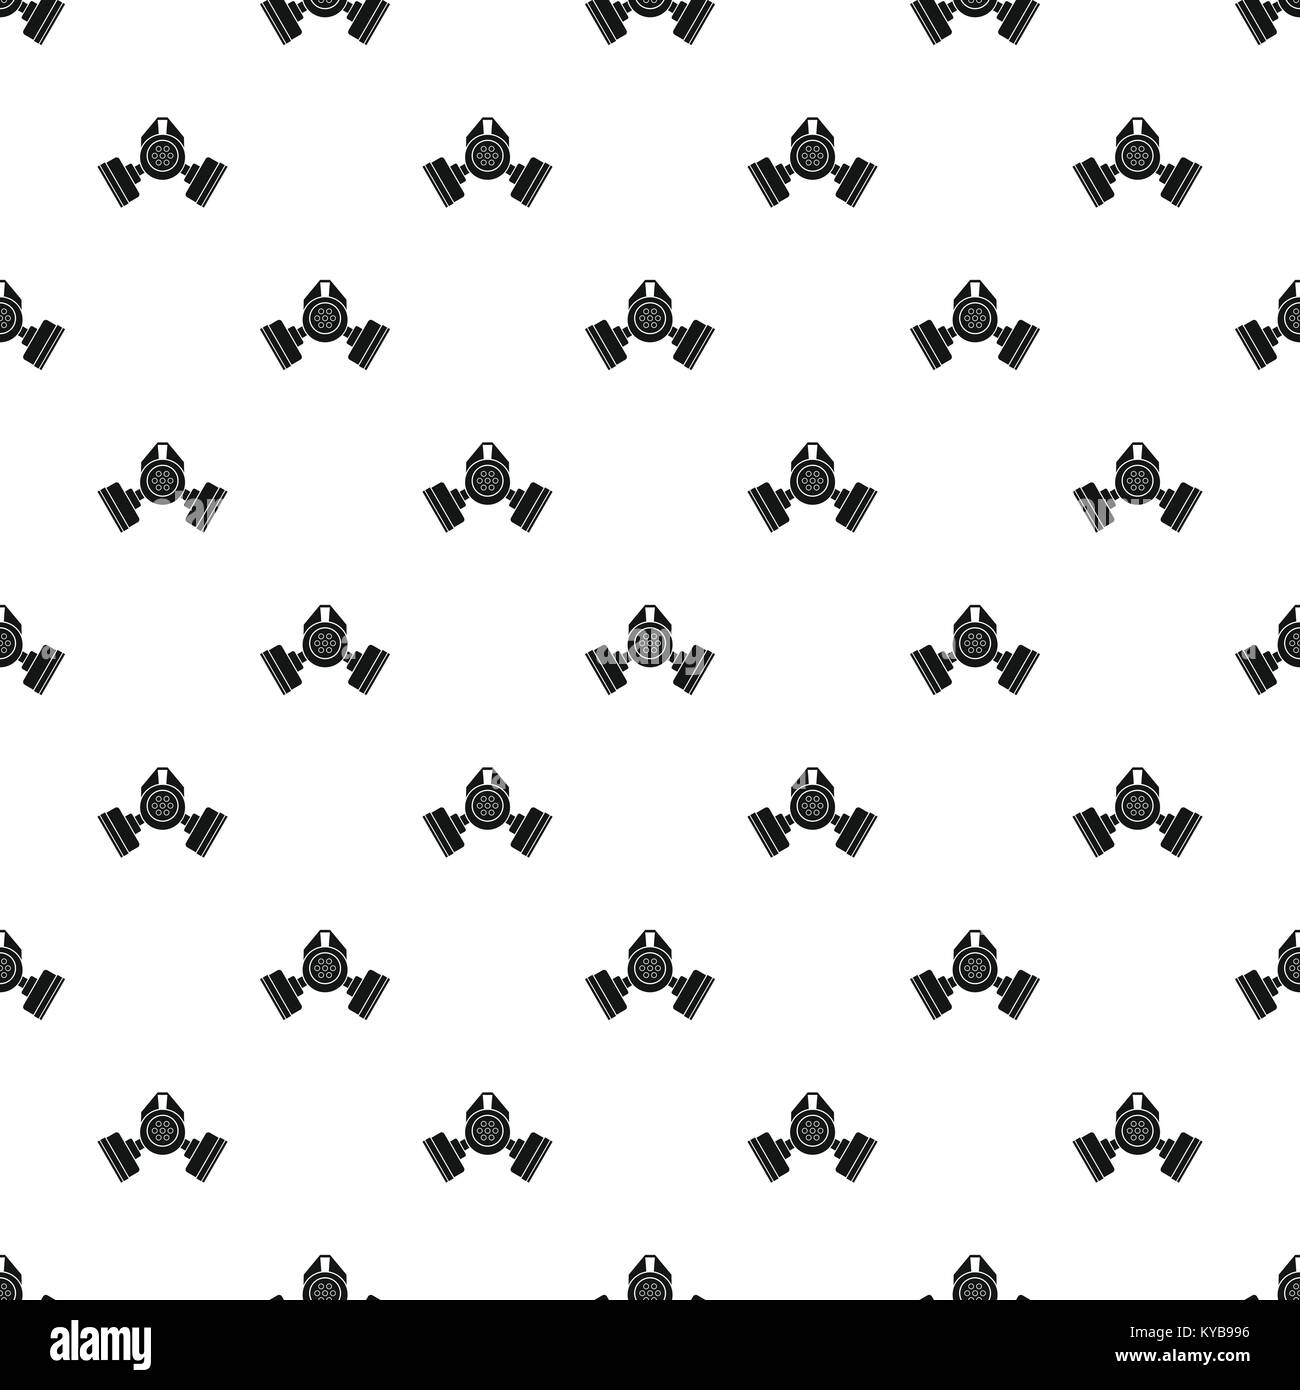 Gas mask pattern vector Stock Vector